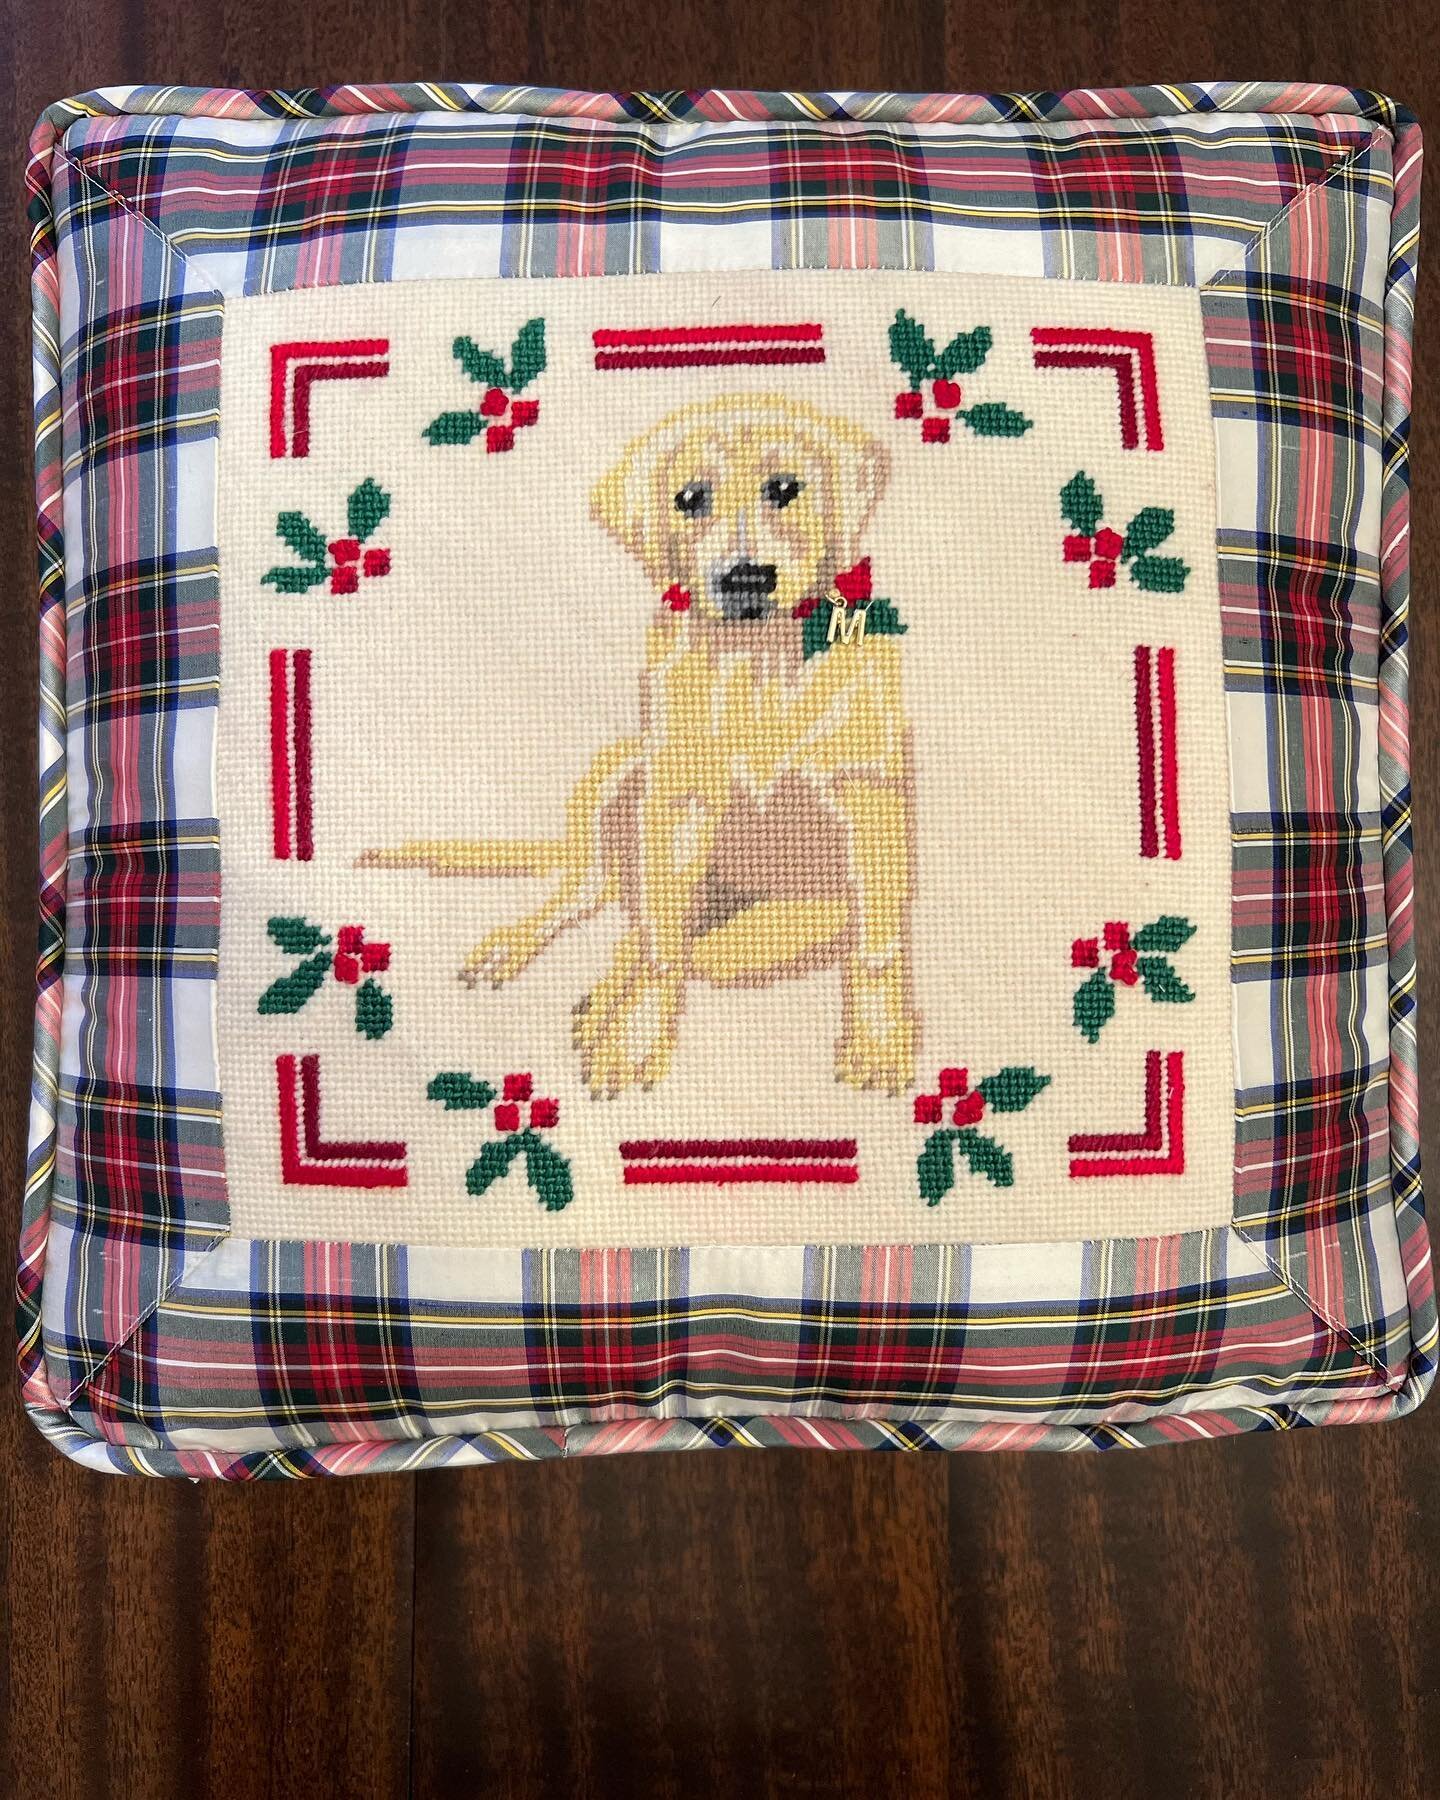 I know many of you saw this pillow I stitched from the most talented finisher @christyragandesigns this week but I waited to post till it arrived.

I stitched this amazing @blueridgestitchery canvas for my Eleanor for her bad girl Marigold. Paige is 